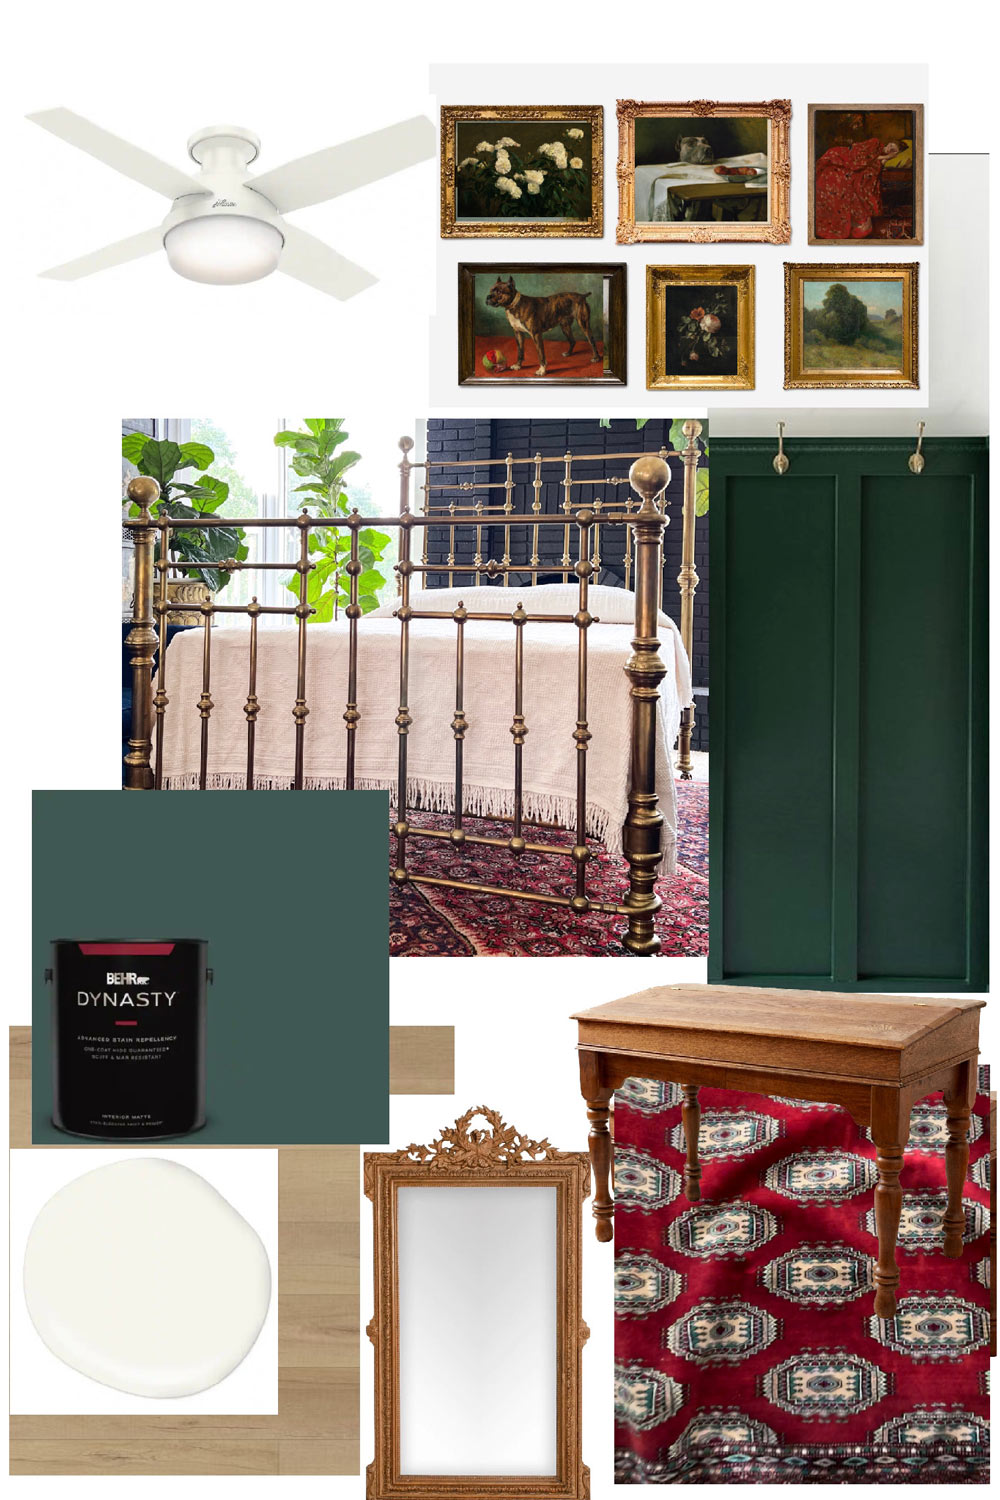 A mood board of a room including paint, bed frame, picture frames, mirror, ceiling fan and table.